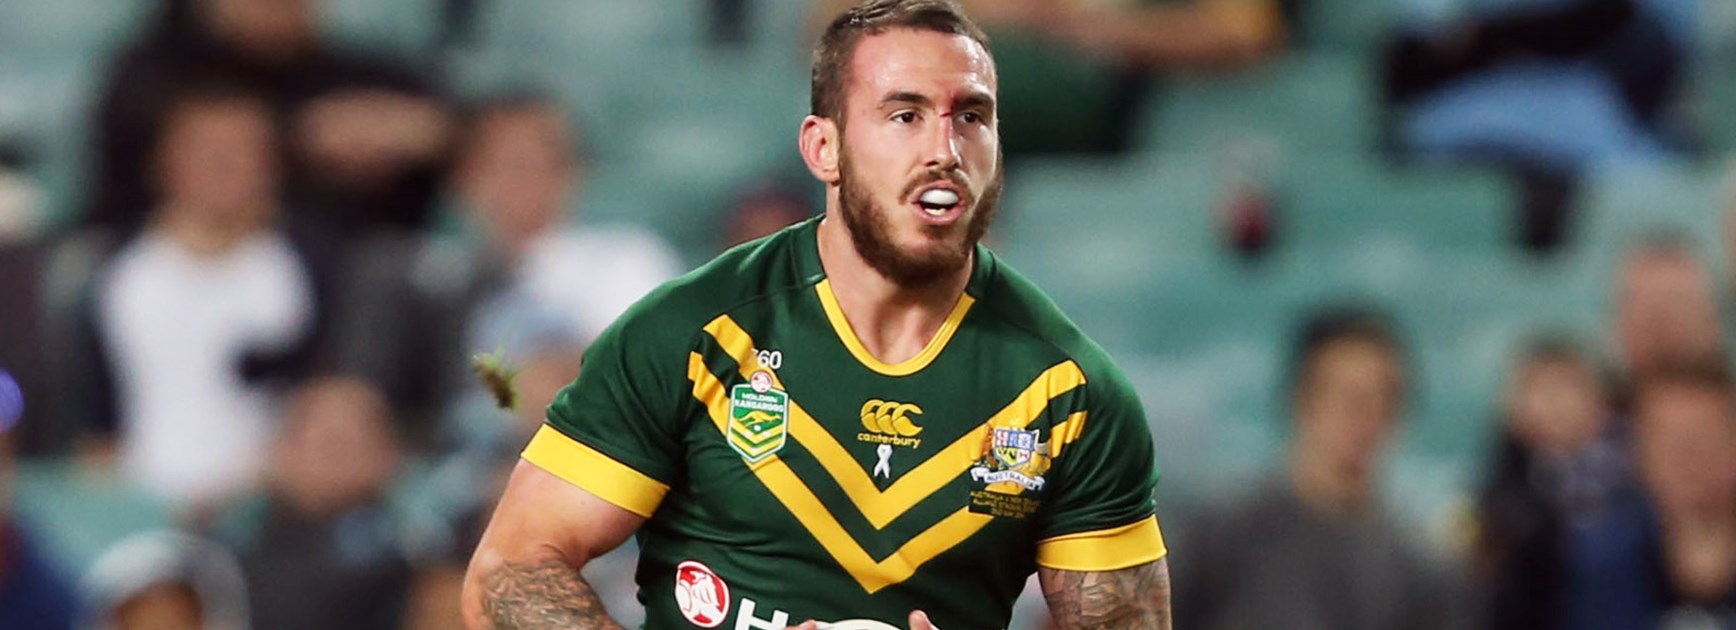 Broncos fullback Darius Boyd has been named in the Kangaroos No.1 jersey for the 2016 Trans-Tasman Test in Newcastle.